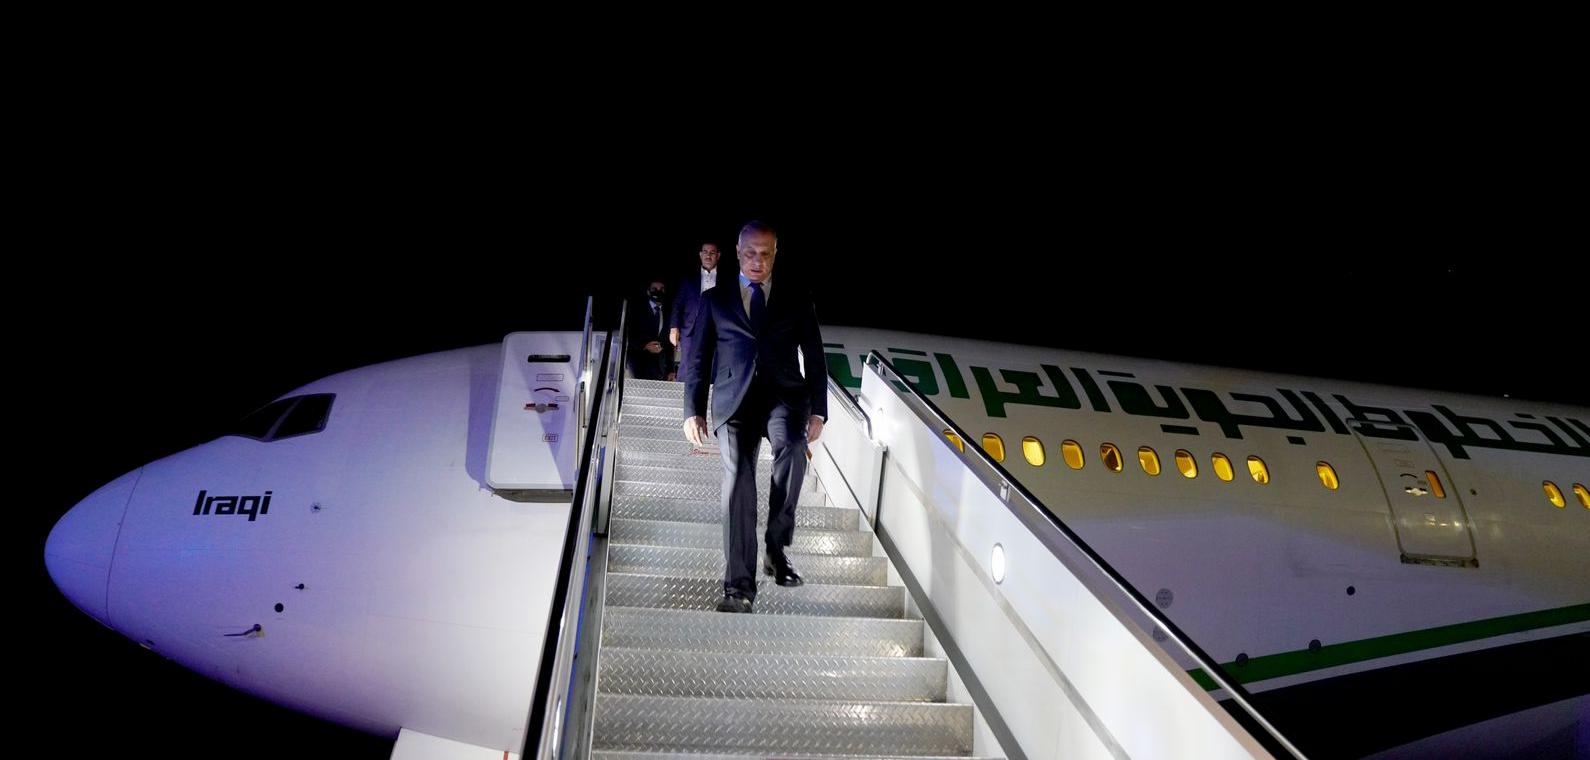 Al-Kazemi arrives in New York - He will meet kings and heads of state and give a speech on Iraq